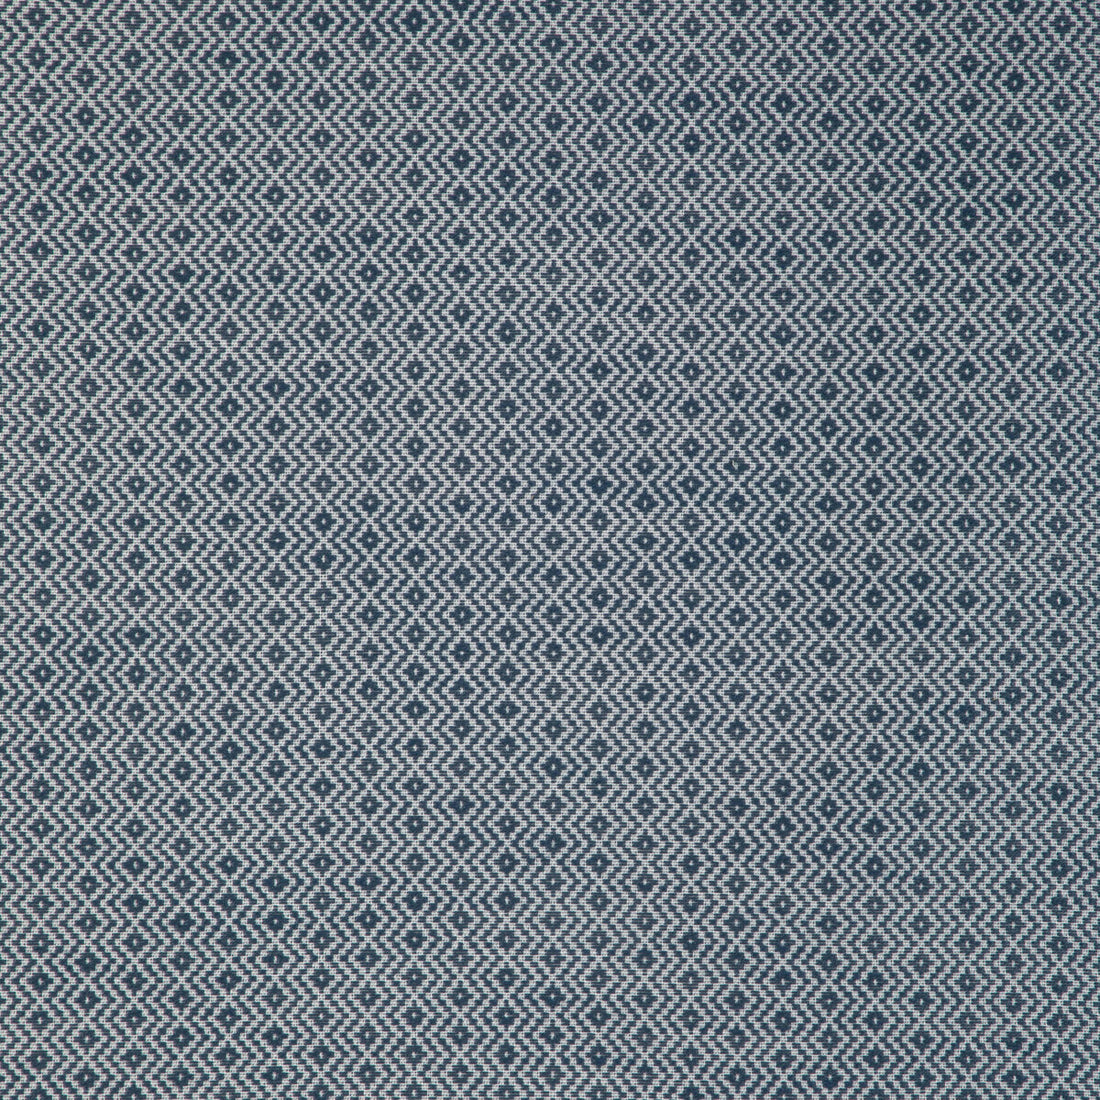 Kravet Design fabric in 36884-50 color - pattern 36884.50.0 - by Kravet Design in the Insideout Seaqual Initiative collection